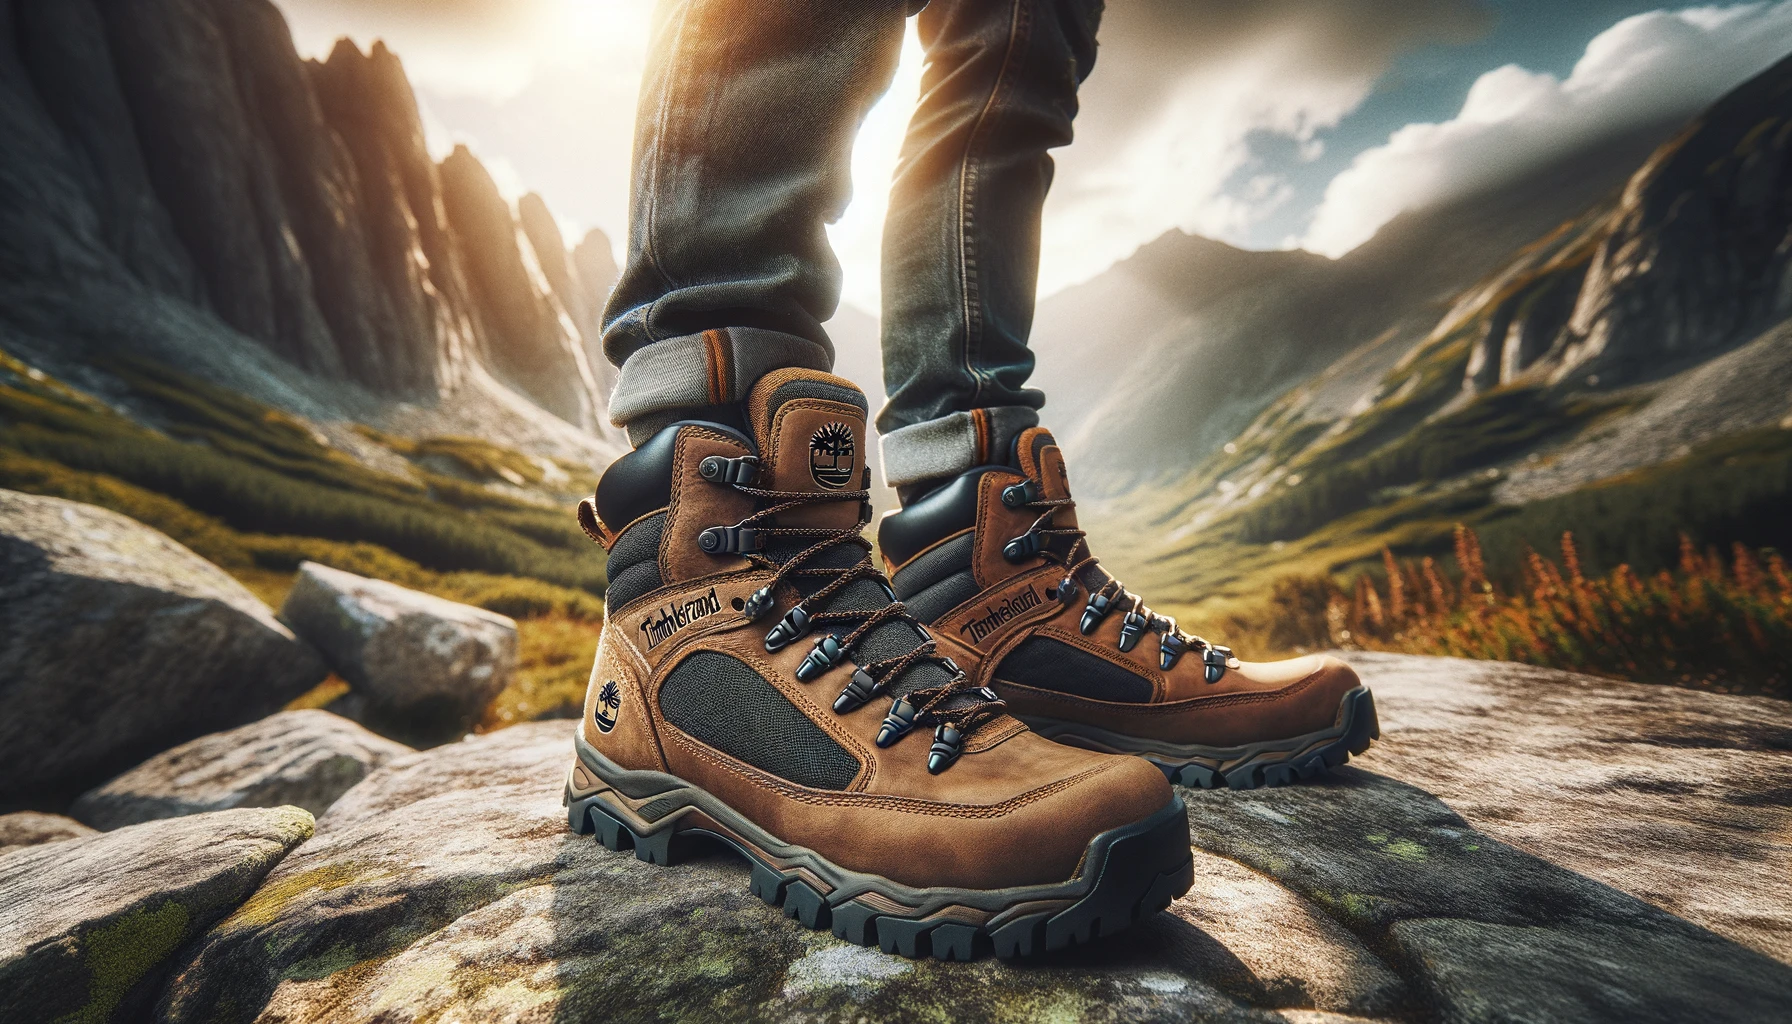 An image showcasing Timberland hiking boots, highlighting their durability and suitability for outdoor adventures. The scene captures the boots in a rugged outdoor setting, possibly on a rocky trail or amidst mountainous terrain, emphasizing their robust design and the technology that makes them ideal for hiking. The boots are prominently displayed, with attention to their distinctive features such as waterproof materials, strong grip soles, and comfortable fit. The background enhances the adventurous spirit of the boots, inviting viewers to imagine the journeys they could undertake with such reliable footwear.